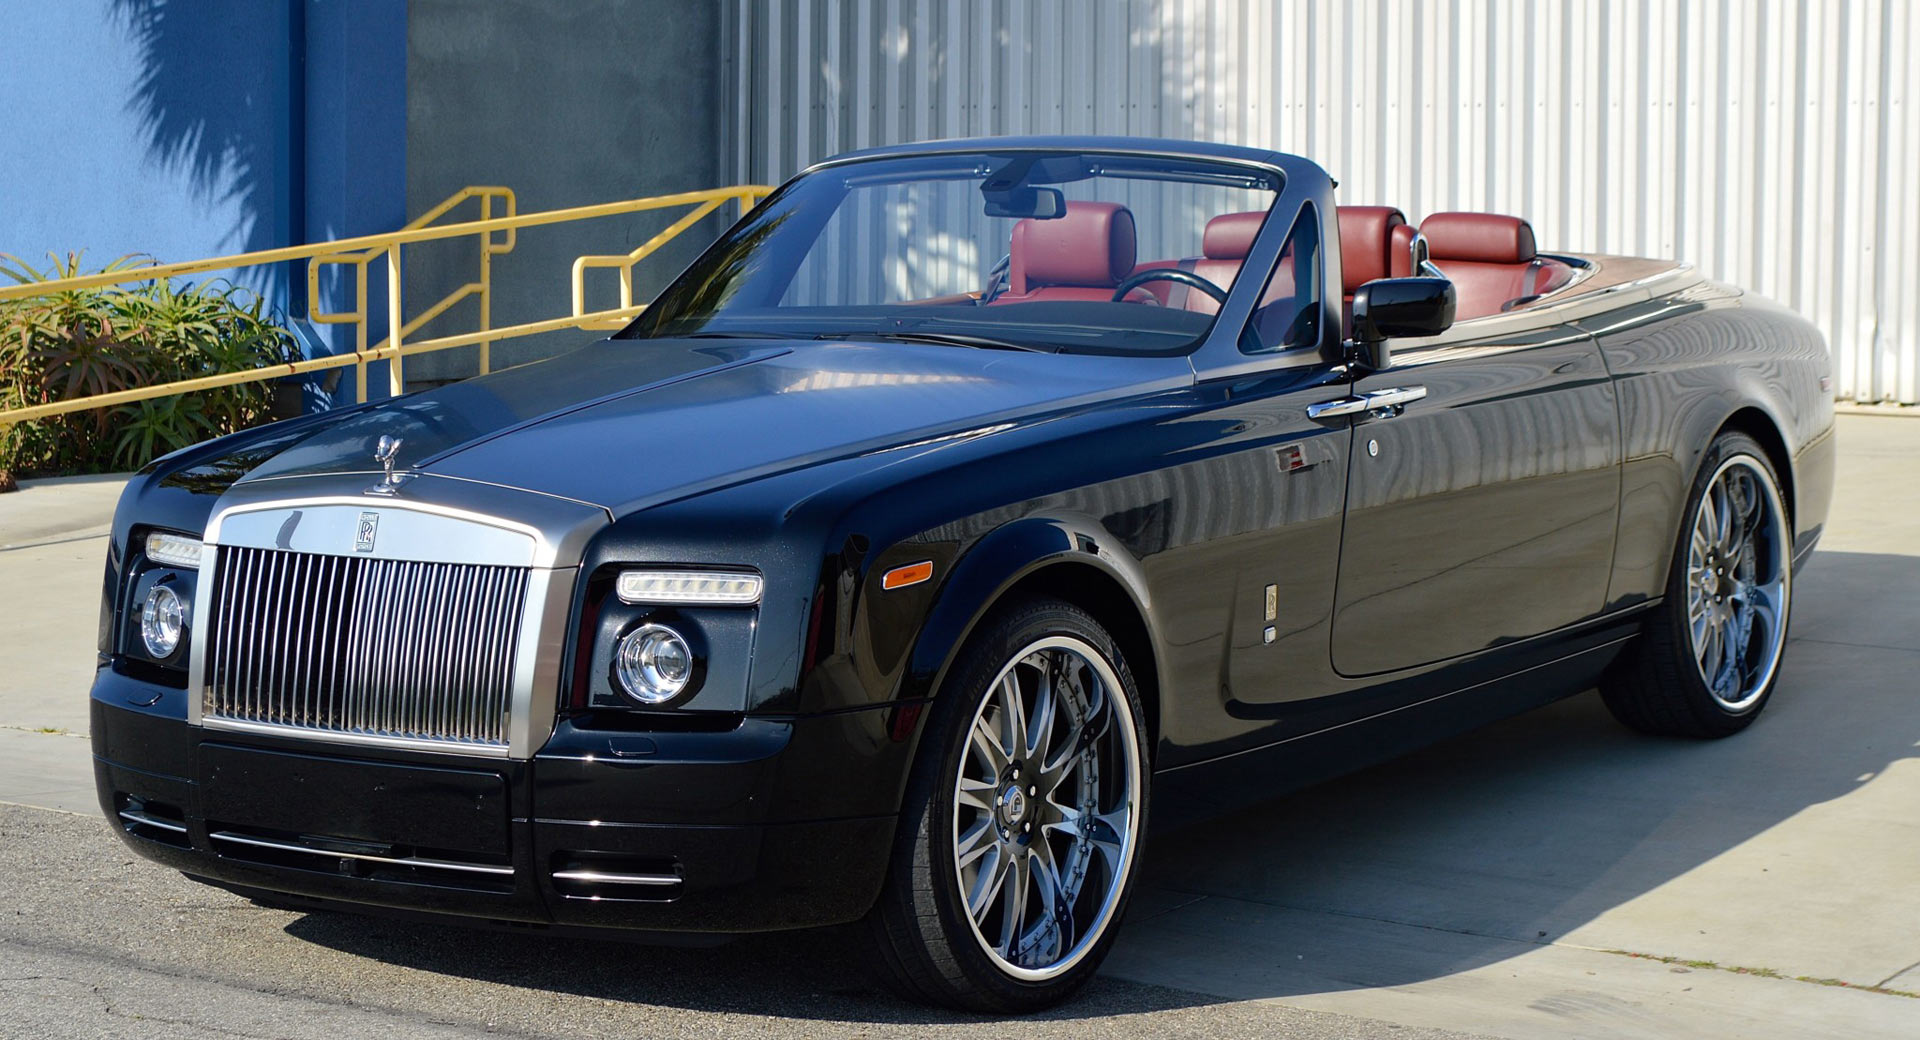 A “Cheap” Rolls-Royce? This Phantom Drophead Coupe Be One |